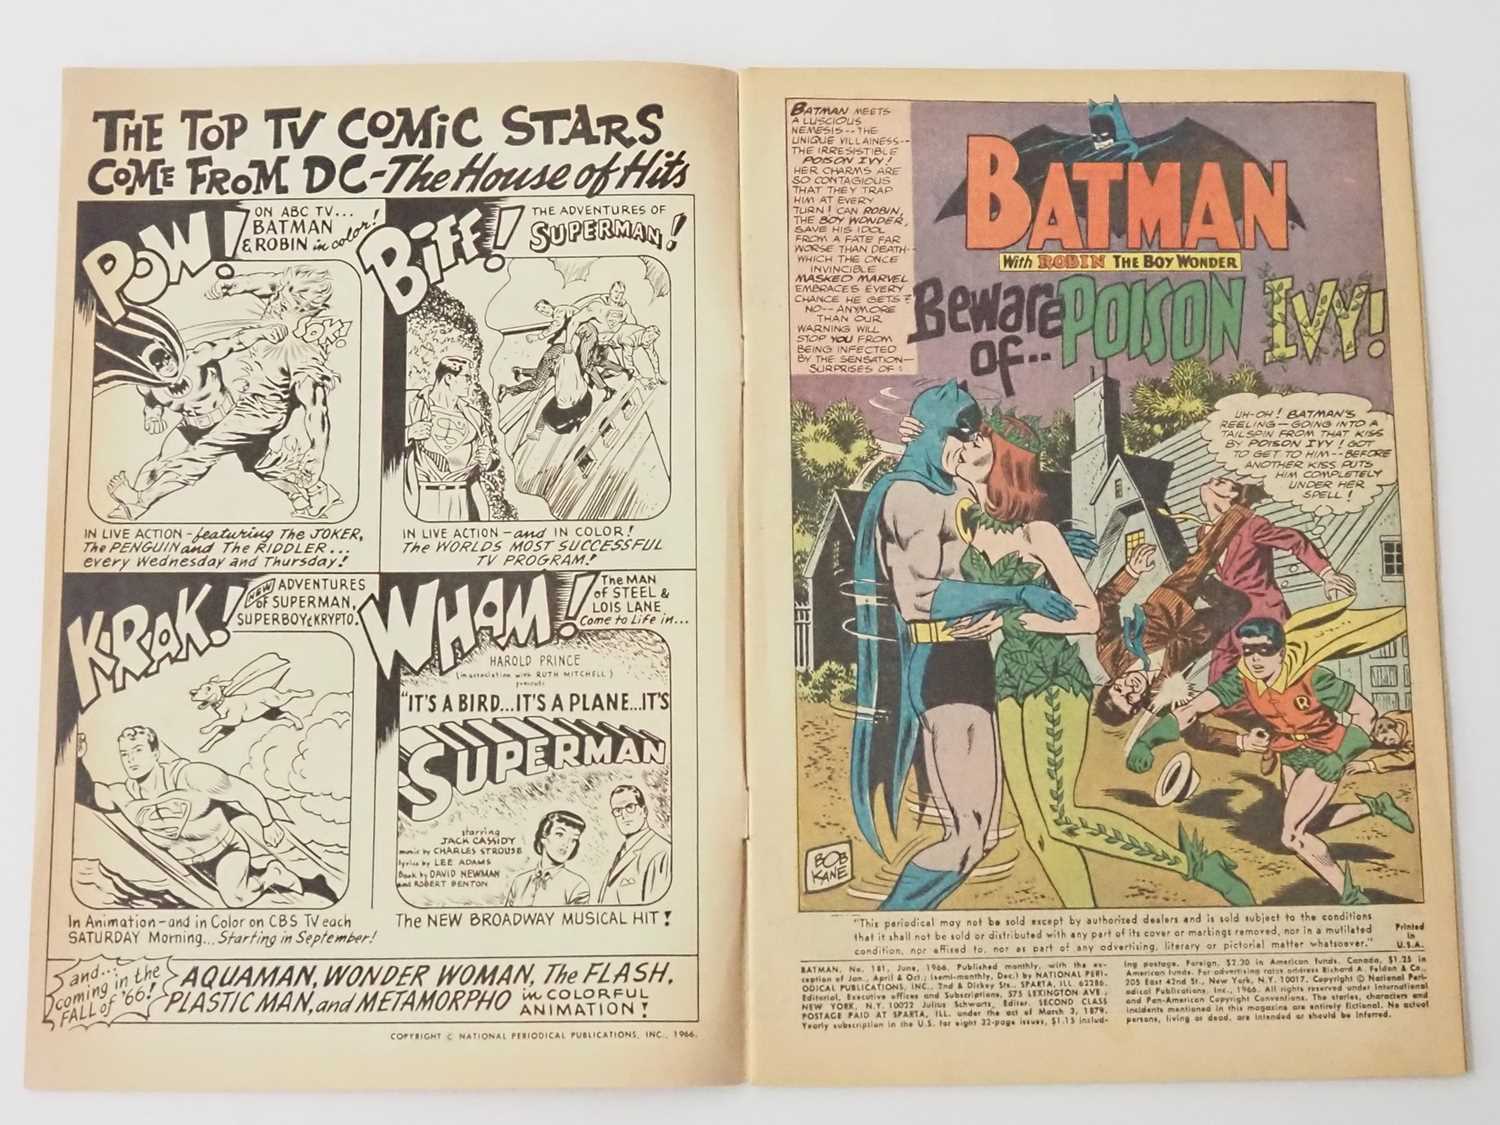 BATMAN #181 - (1966 - DC) - First appearance of Poison Ivy - Centrefold pin-up poster is present but - Image 3 of 30